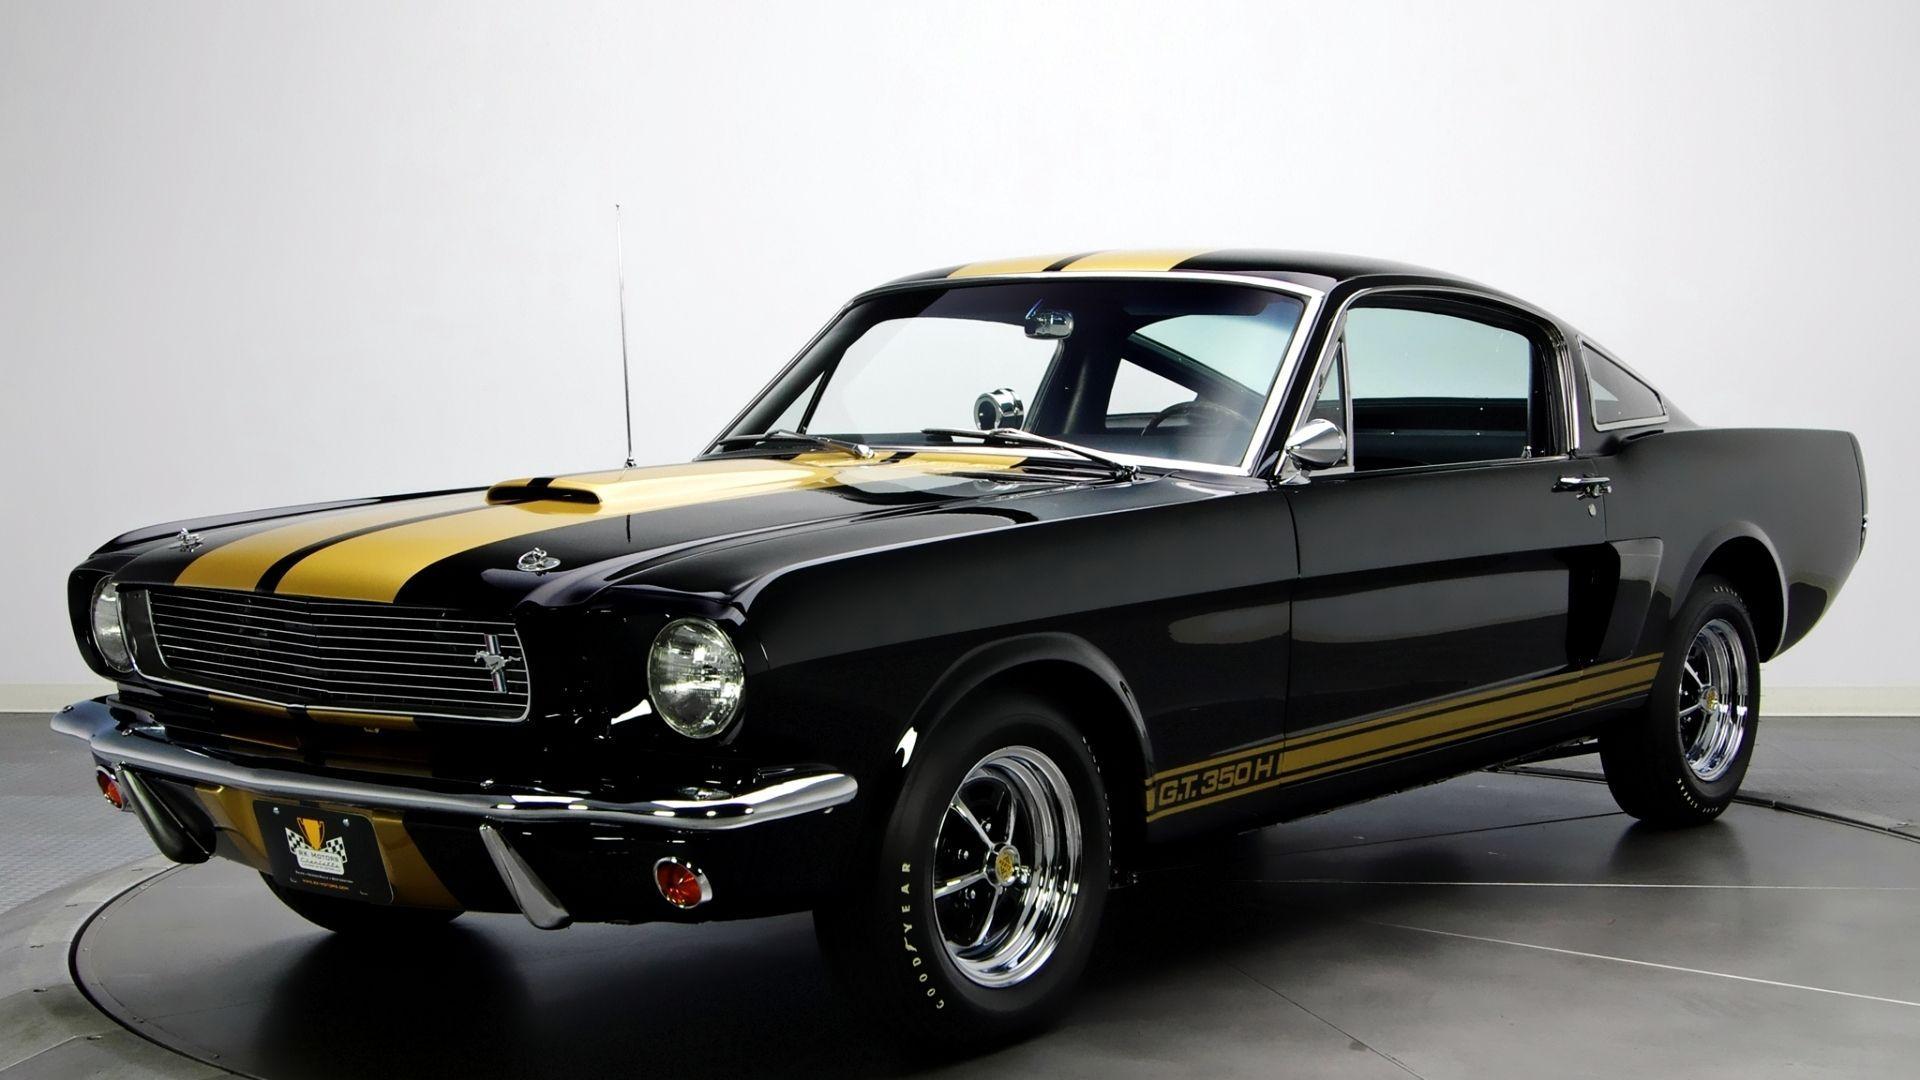 Ford Mustang Shelby GT350 Classic Black Wallpaper